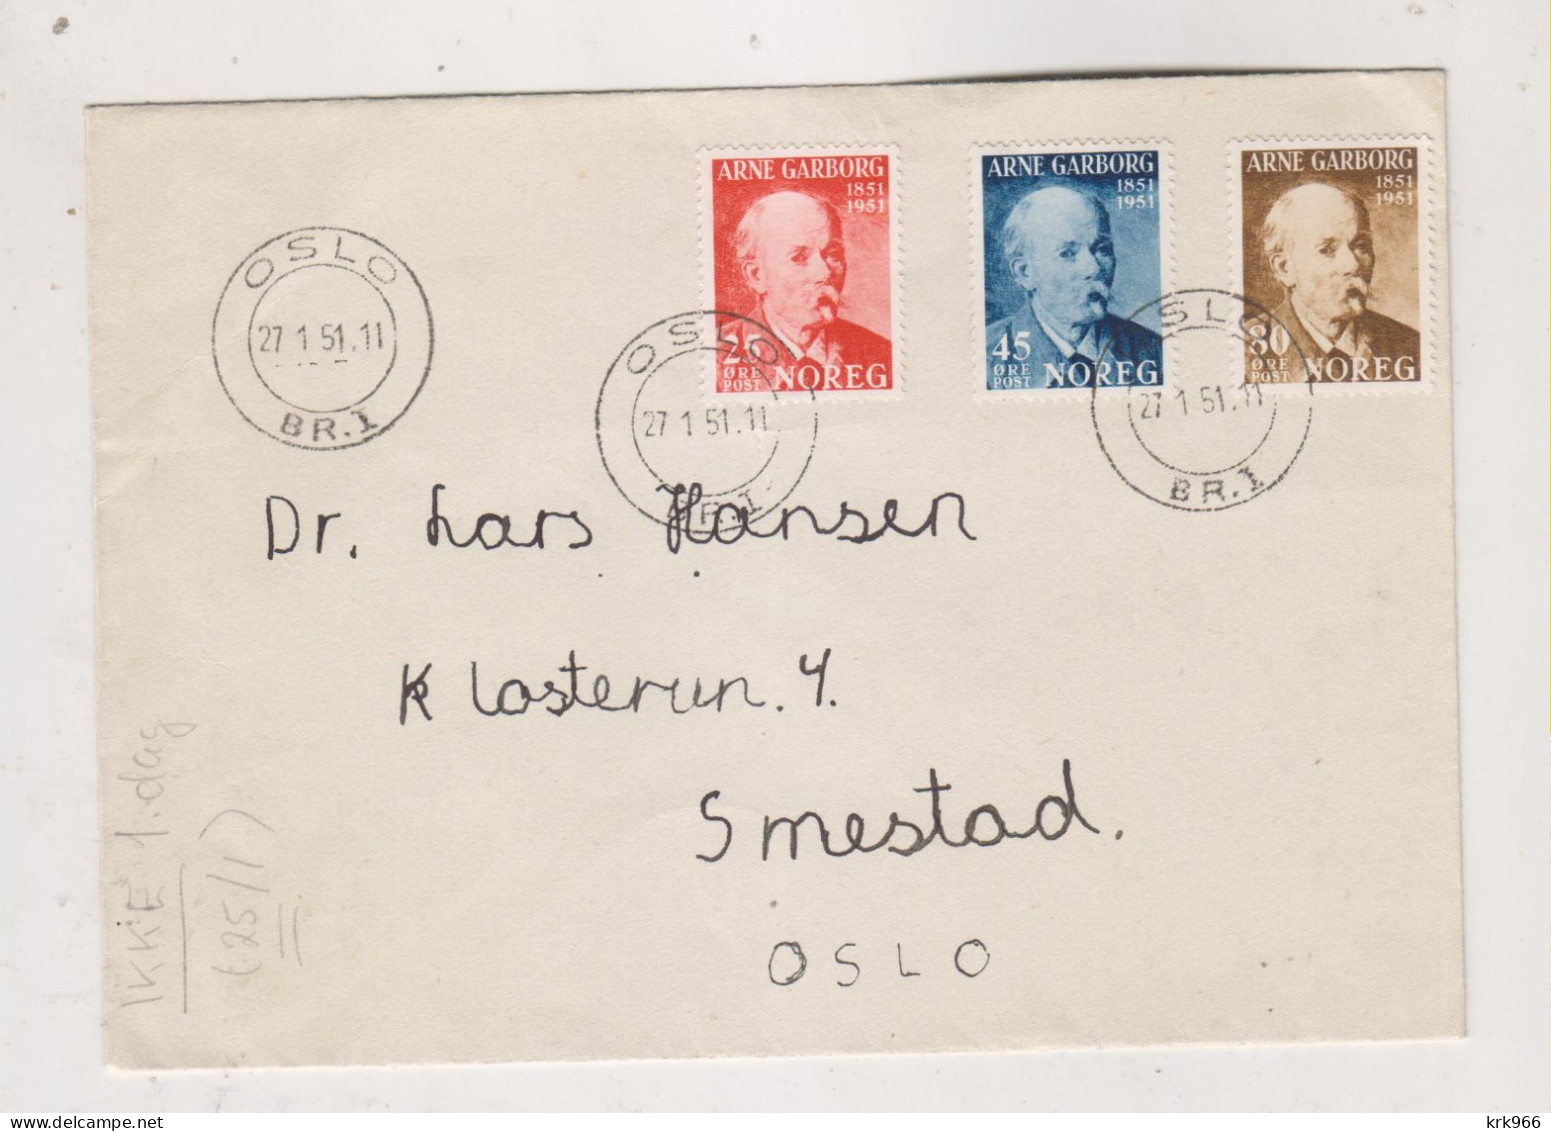 NORWAY 1951 OSLO Nice Cover - Lettres & Documents